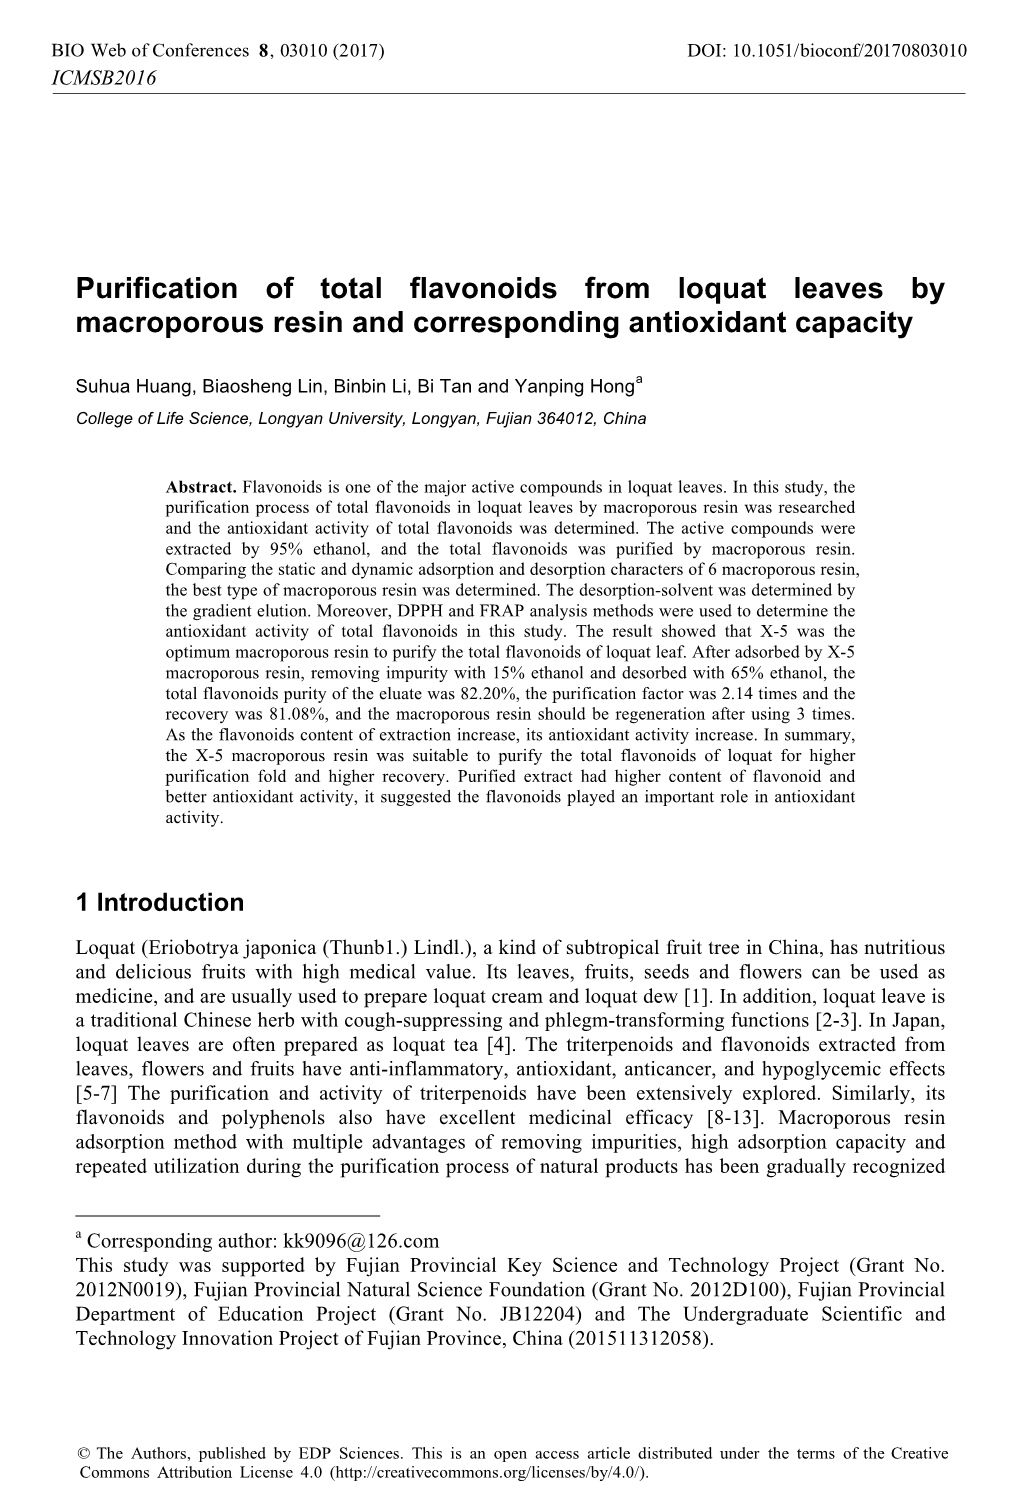 Purification of Total Flavonoids from Loquat Leaves by Macroporous Resin and Corresponding Antioxidant Capacity